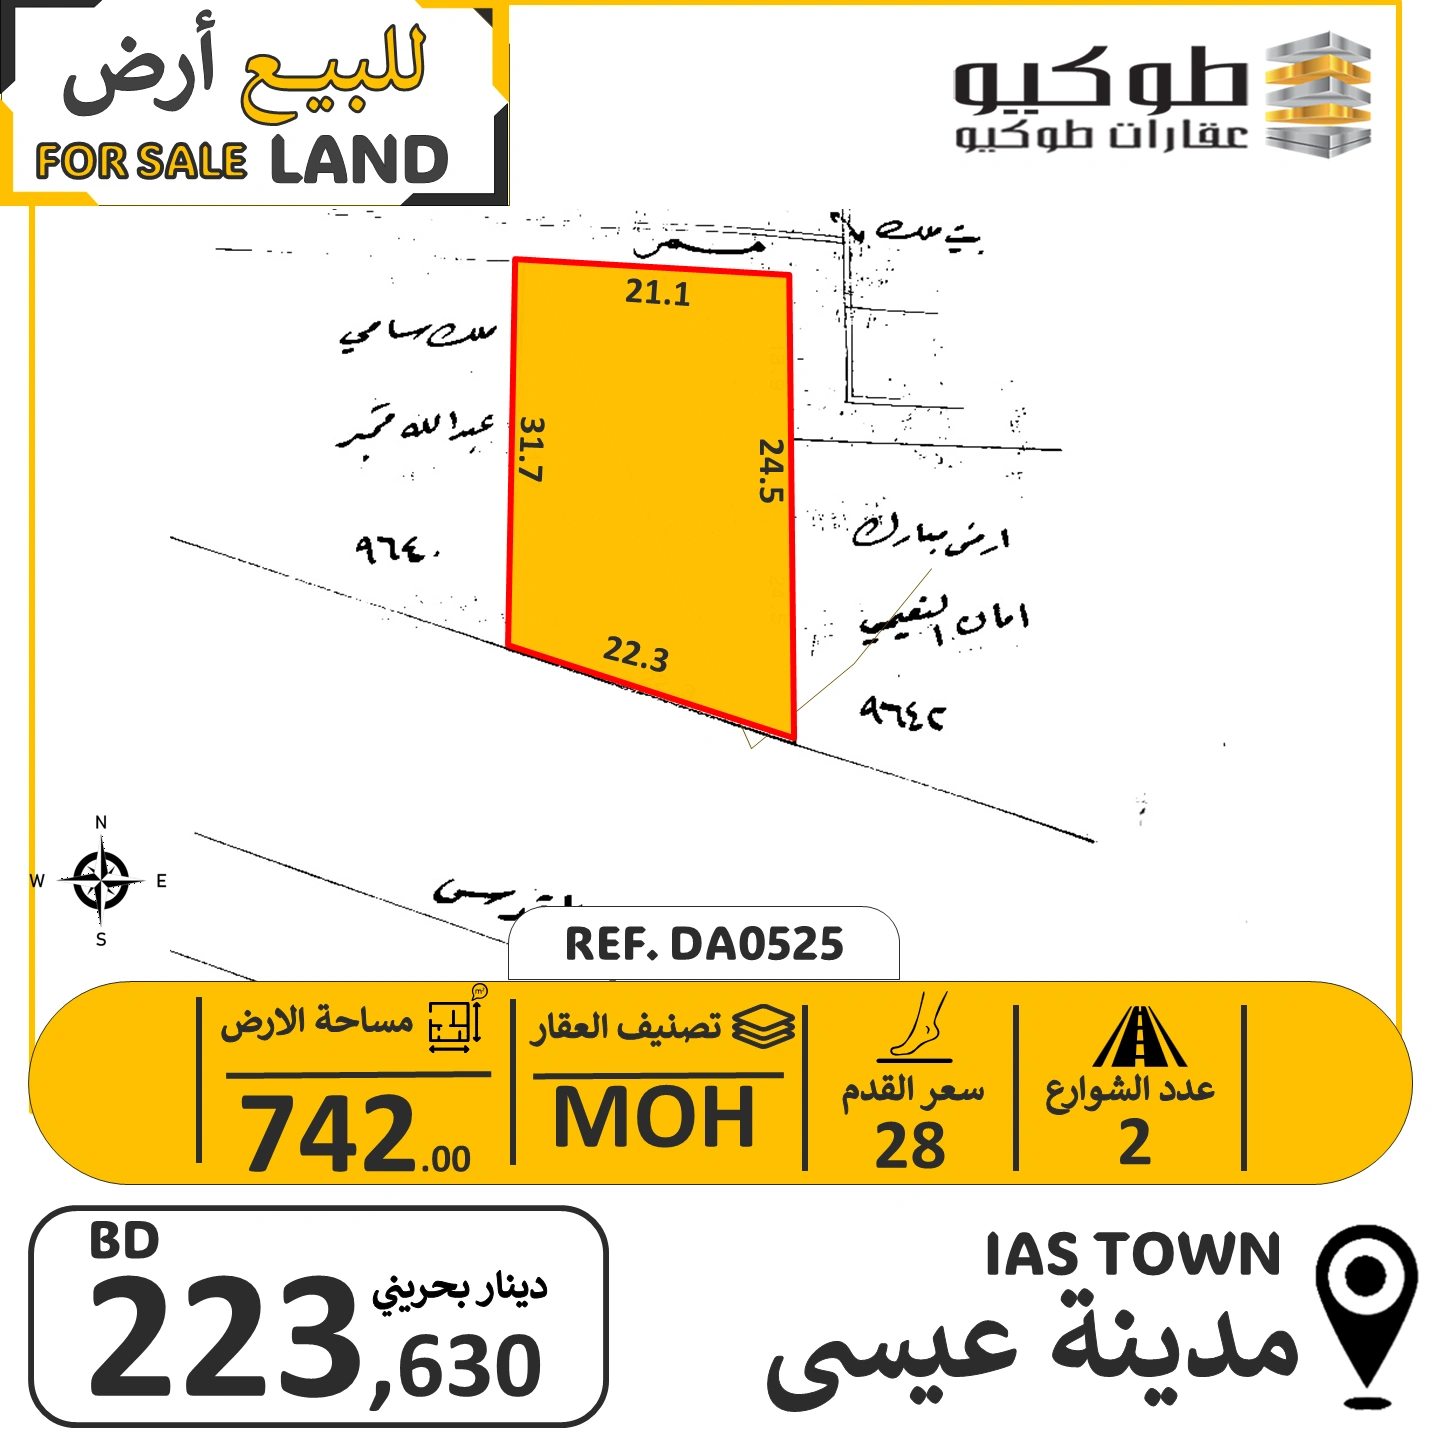 Land for sale for residential construction. mdynt ysy. 